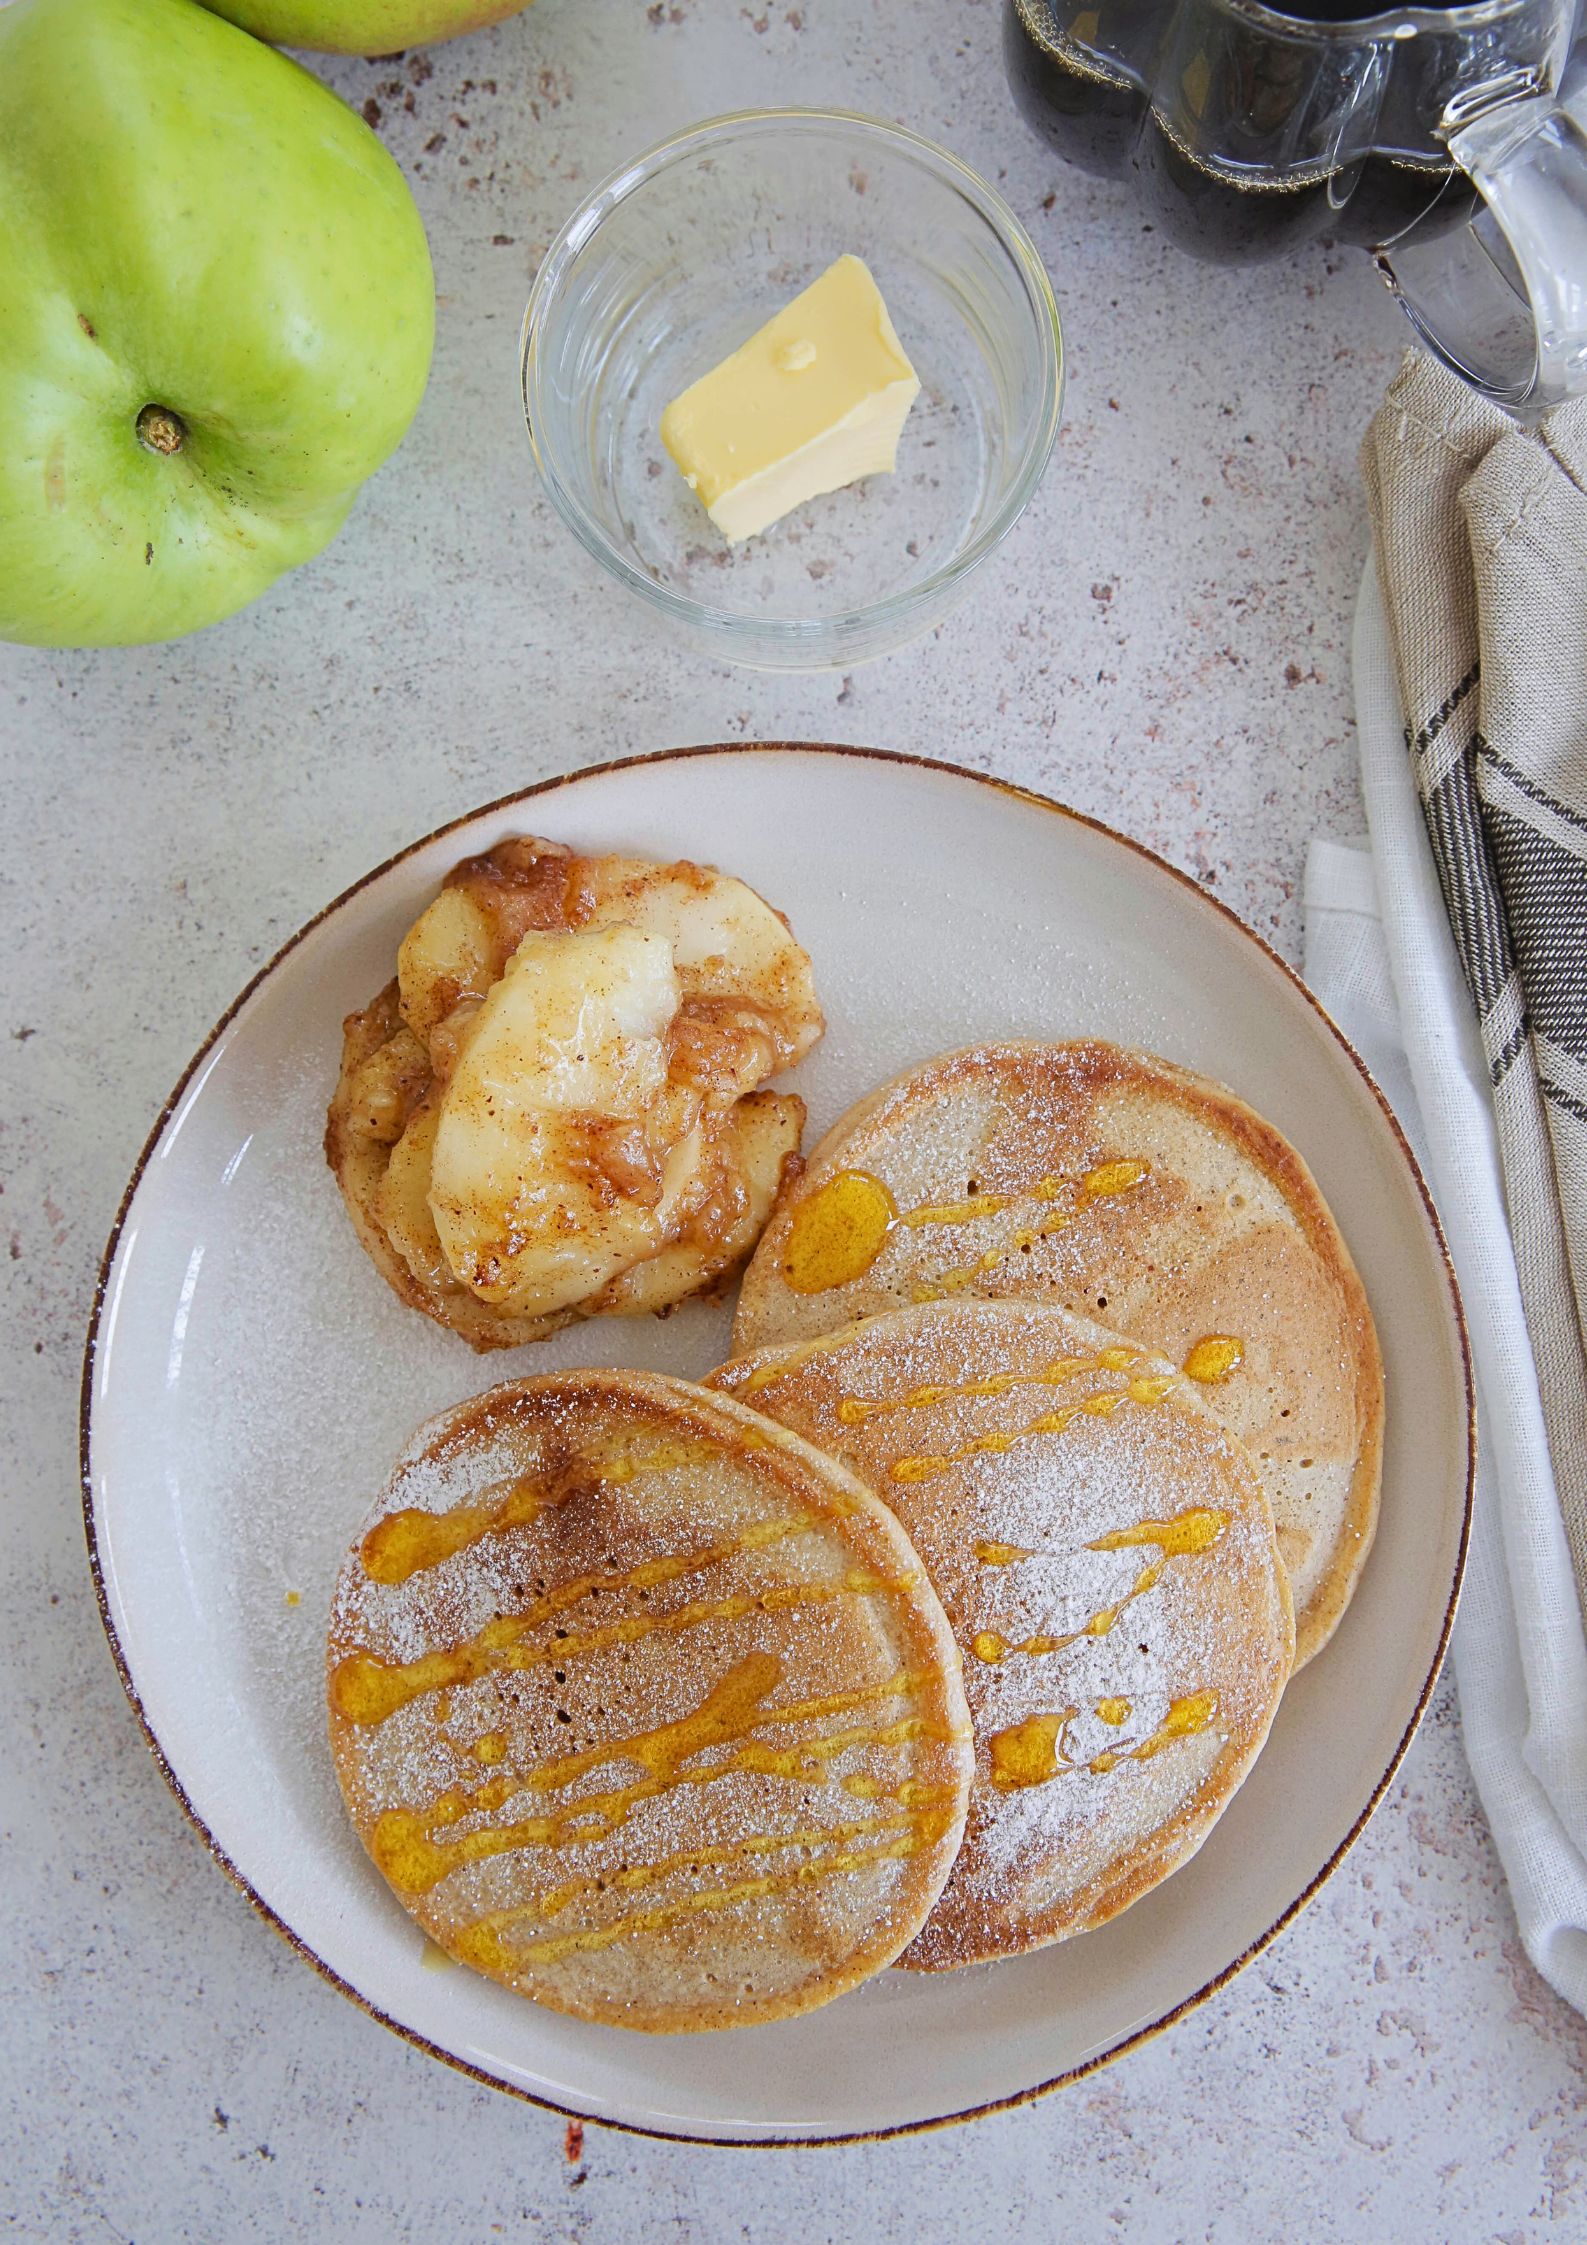 Sweet and fluffy vegan apple cider pancakes topped with a spiced apple compote. Perfect autumn weekend breakfast! Recipe on thecookandhim.com #appleciderpancakes #applepancakes #veganpancakes #eggfreepancakes #veganbreakfast #autumnrecipes